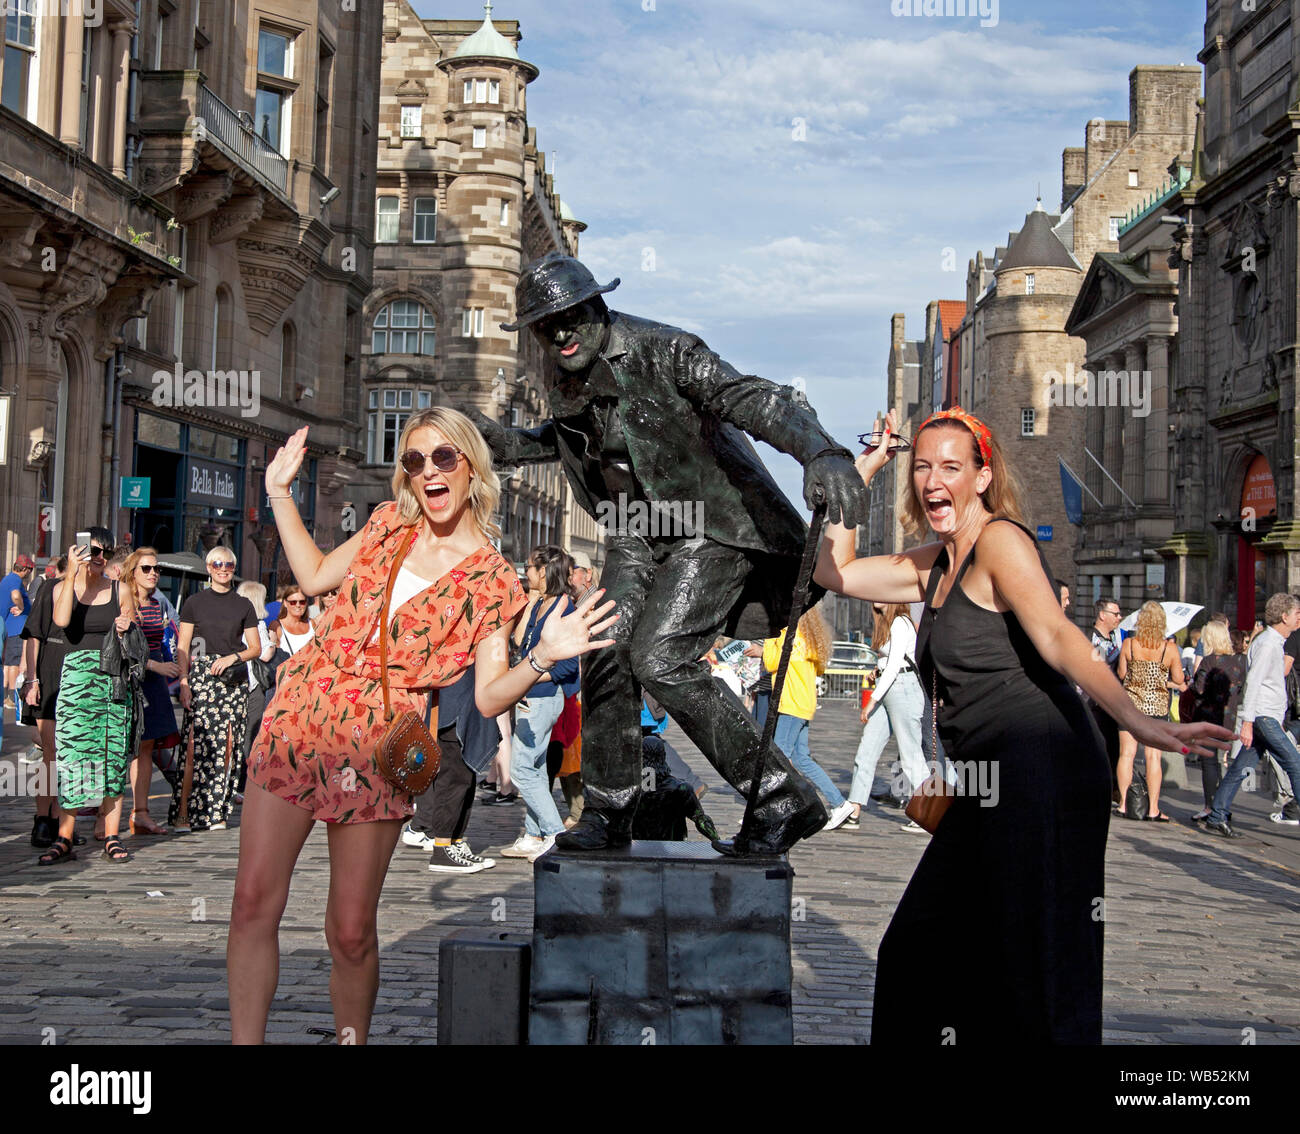 Edinburgh Fringe Festival, Royal Mile, Scotland, UK. 24th Aug, 2019. On this last very hot Saturday of the 2019 Fringe, Kevin the human statue who is normally very dour comes to life to pose with two attractive ladies, must be the heat. Stock Photo